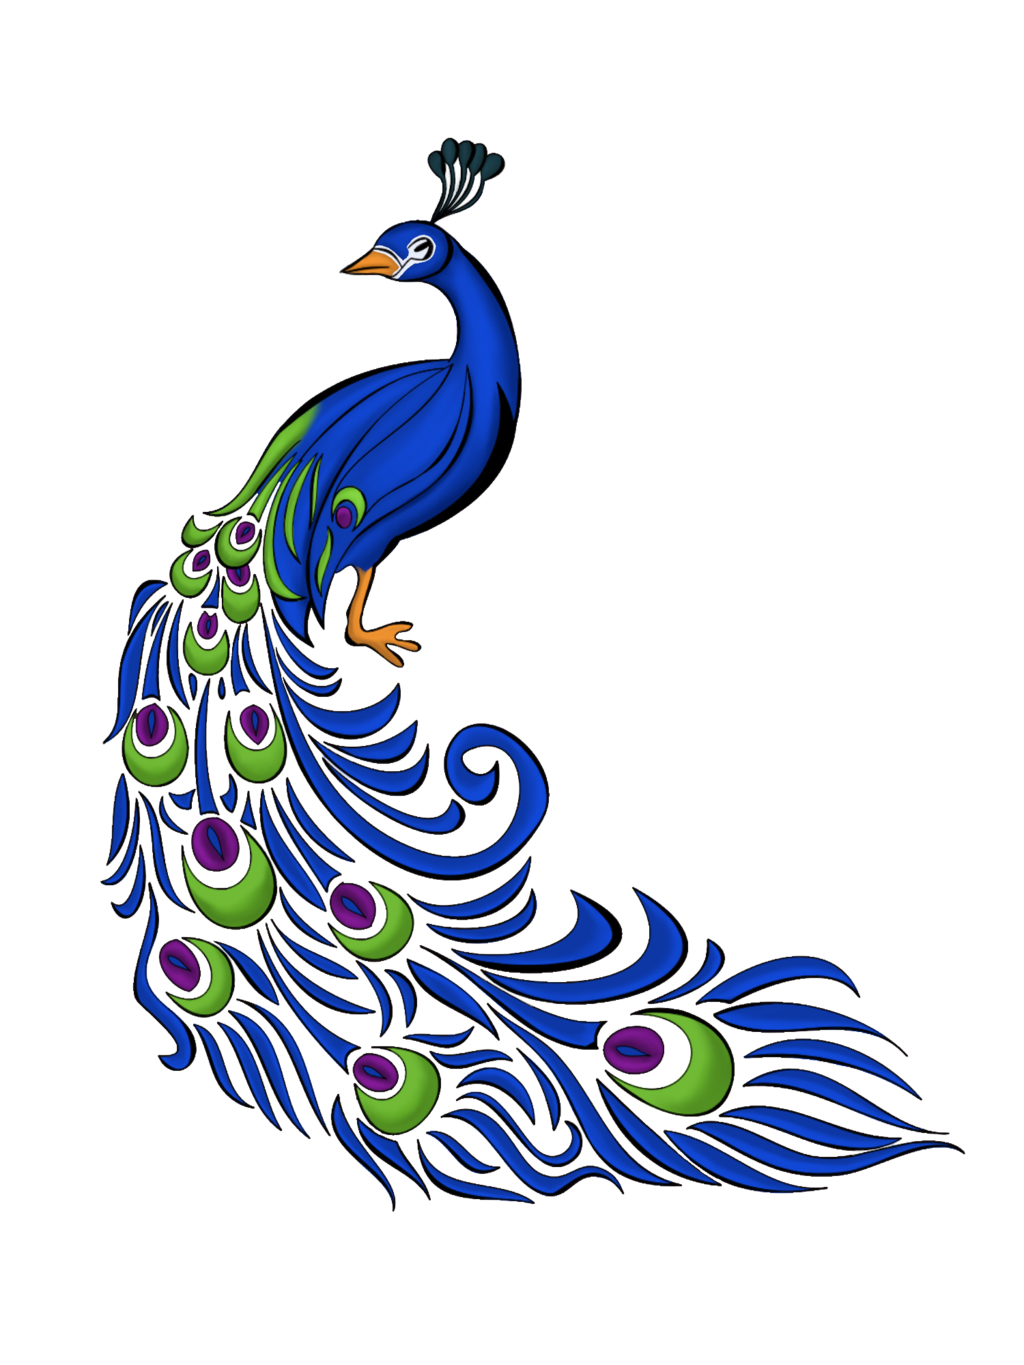 Peacock Images Collection (46+)